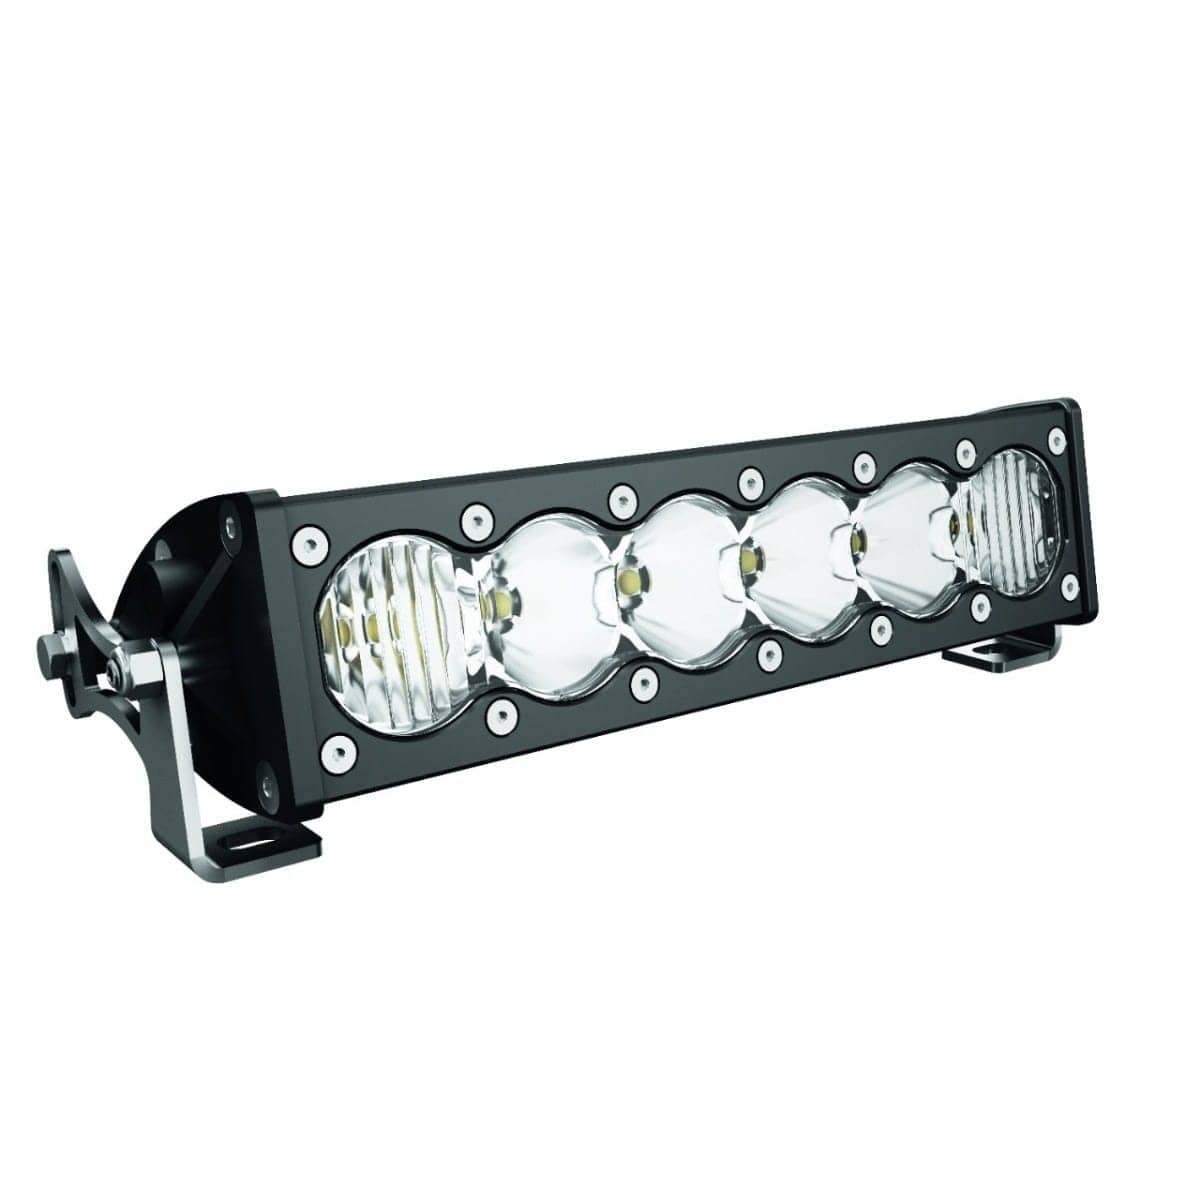 15 in. (38 cm) Double Stacked LED Light Bar (90W) 715002934 - ATV